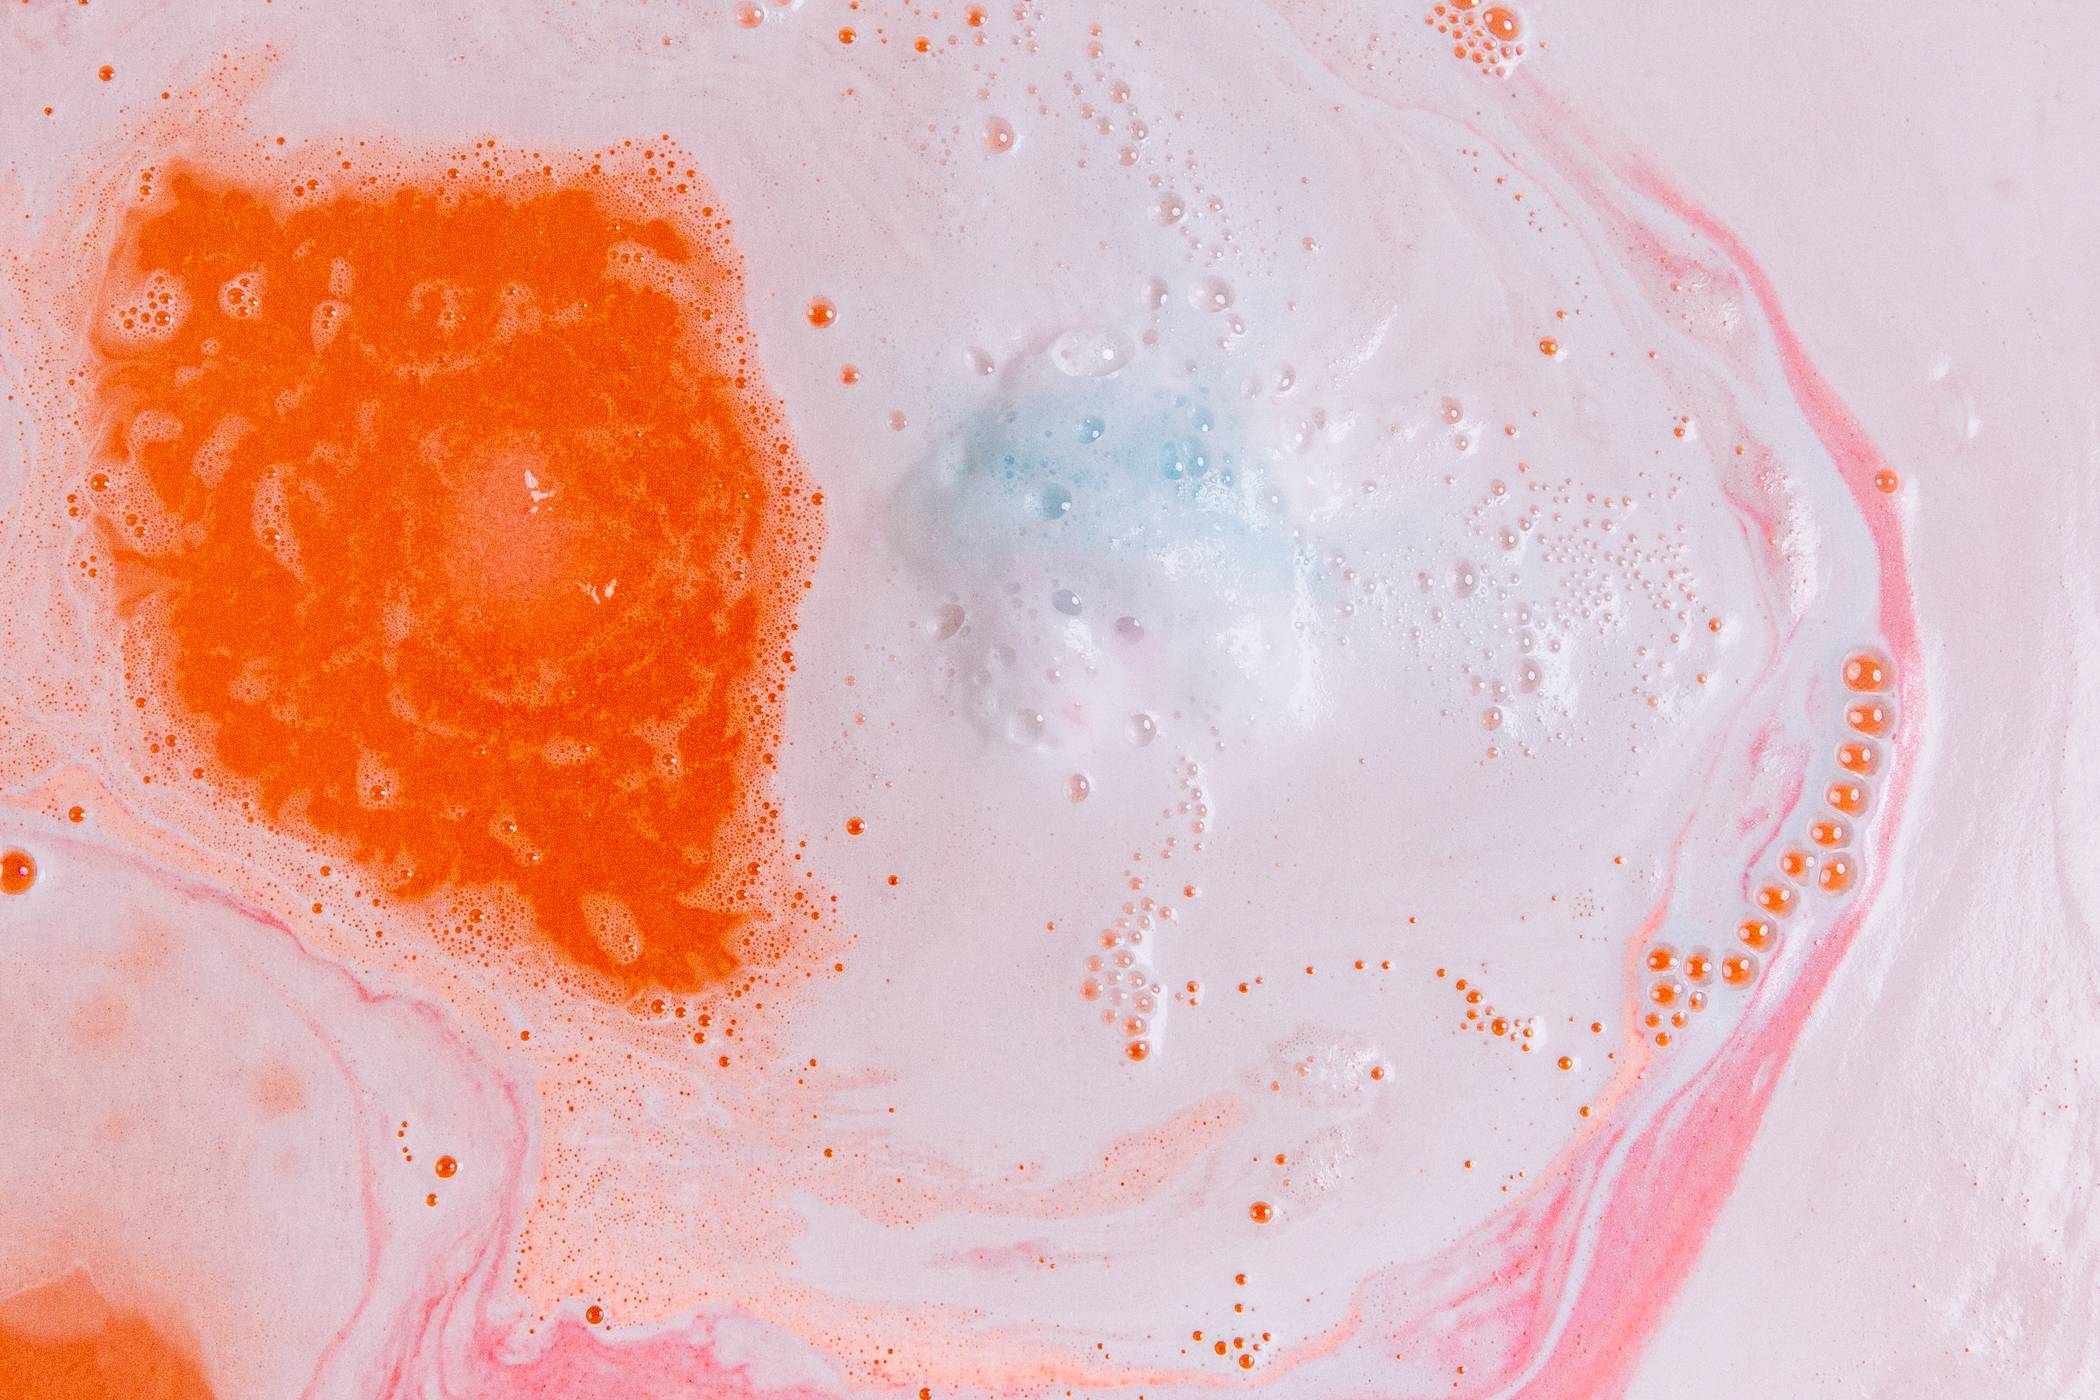 The image shows the bath surface blanketed in thick, velvety foamy swirls of pink white and orange. 